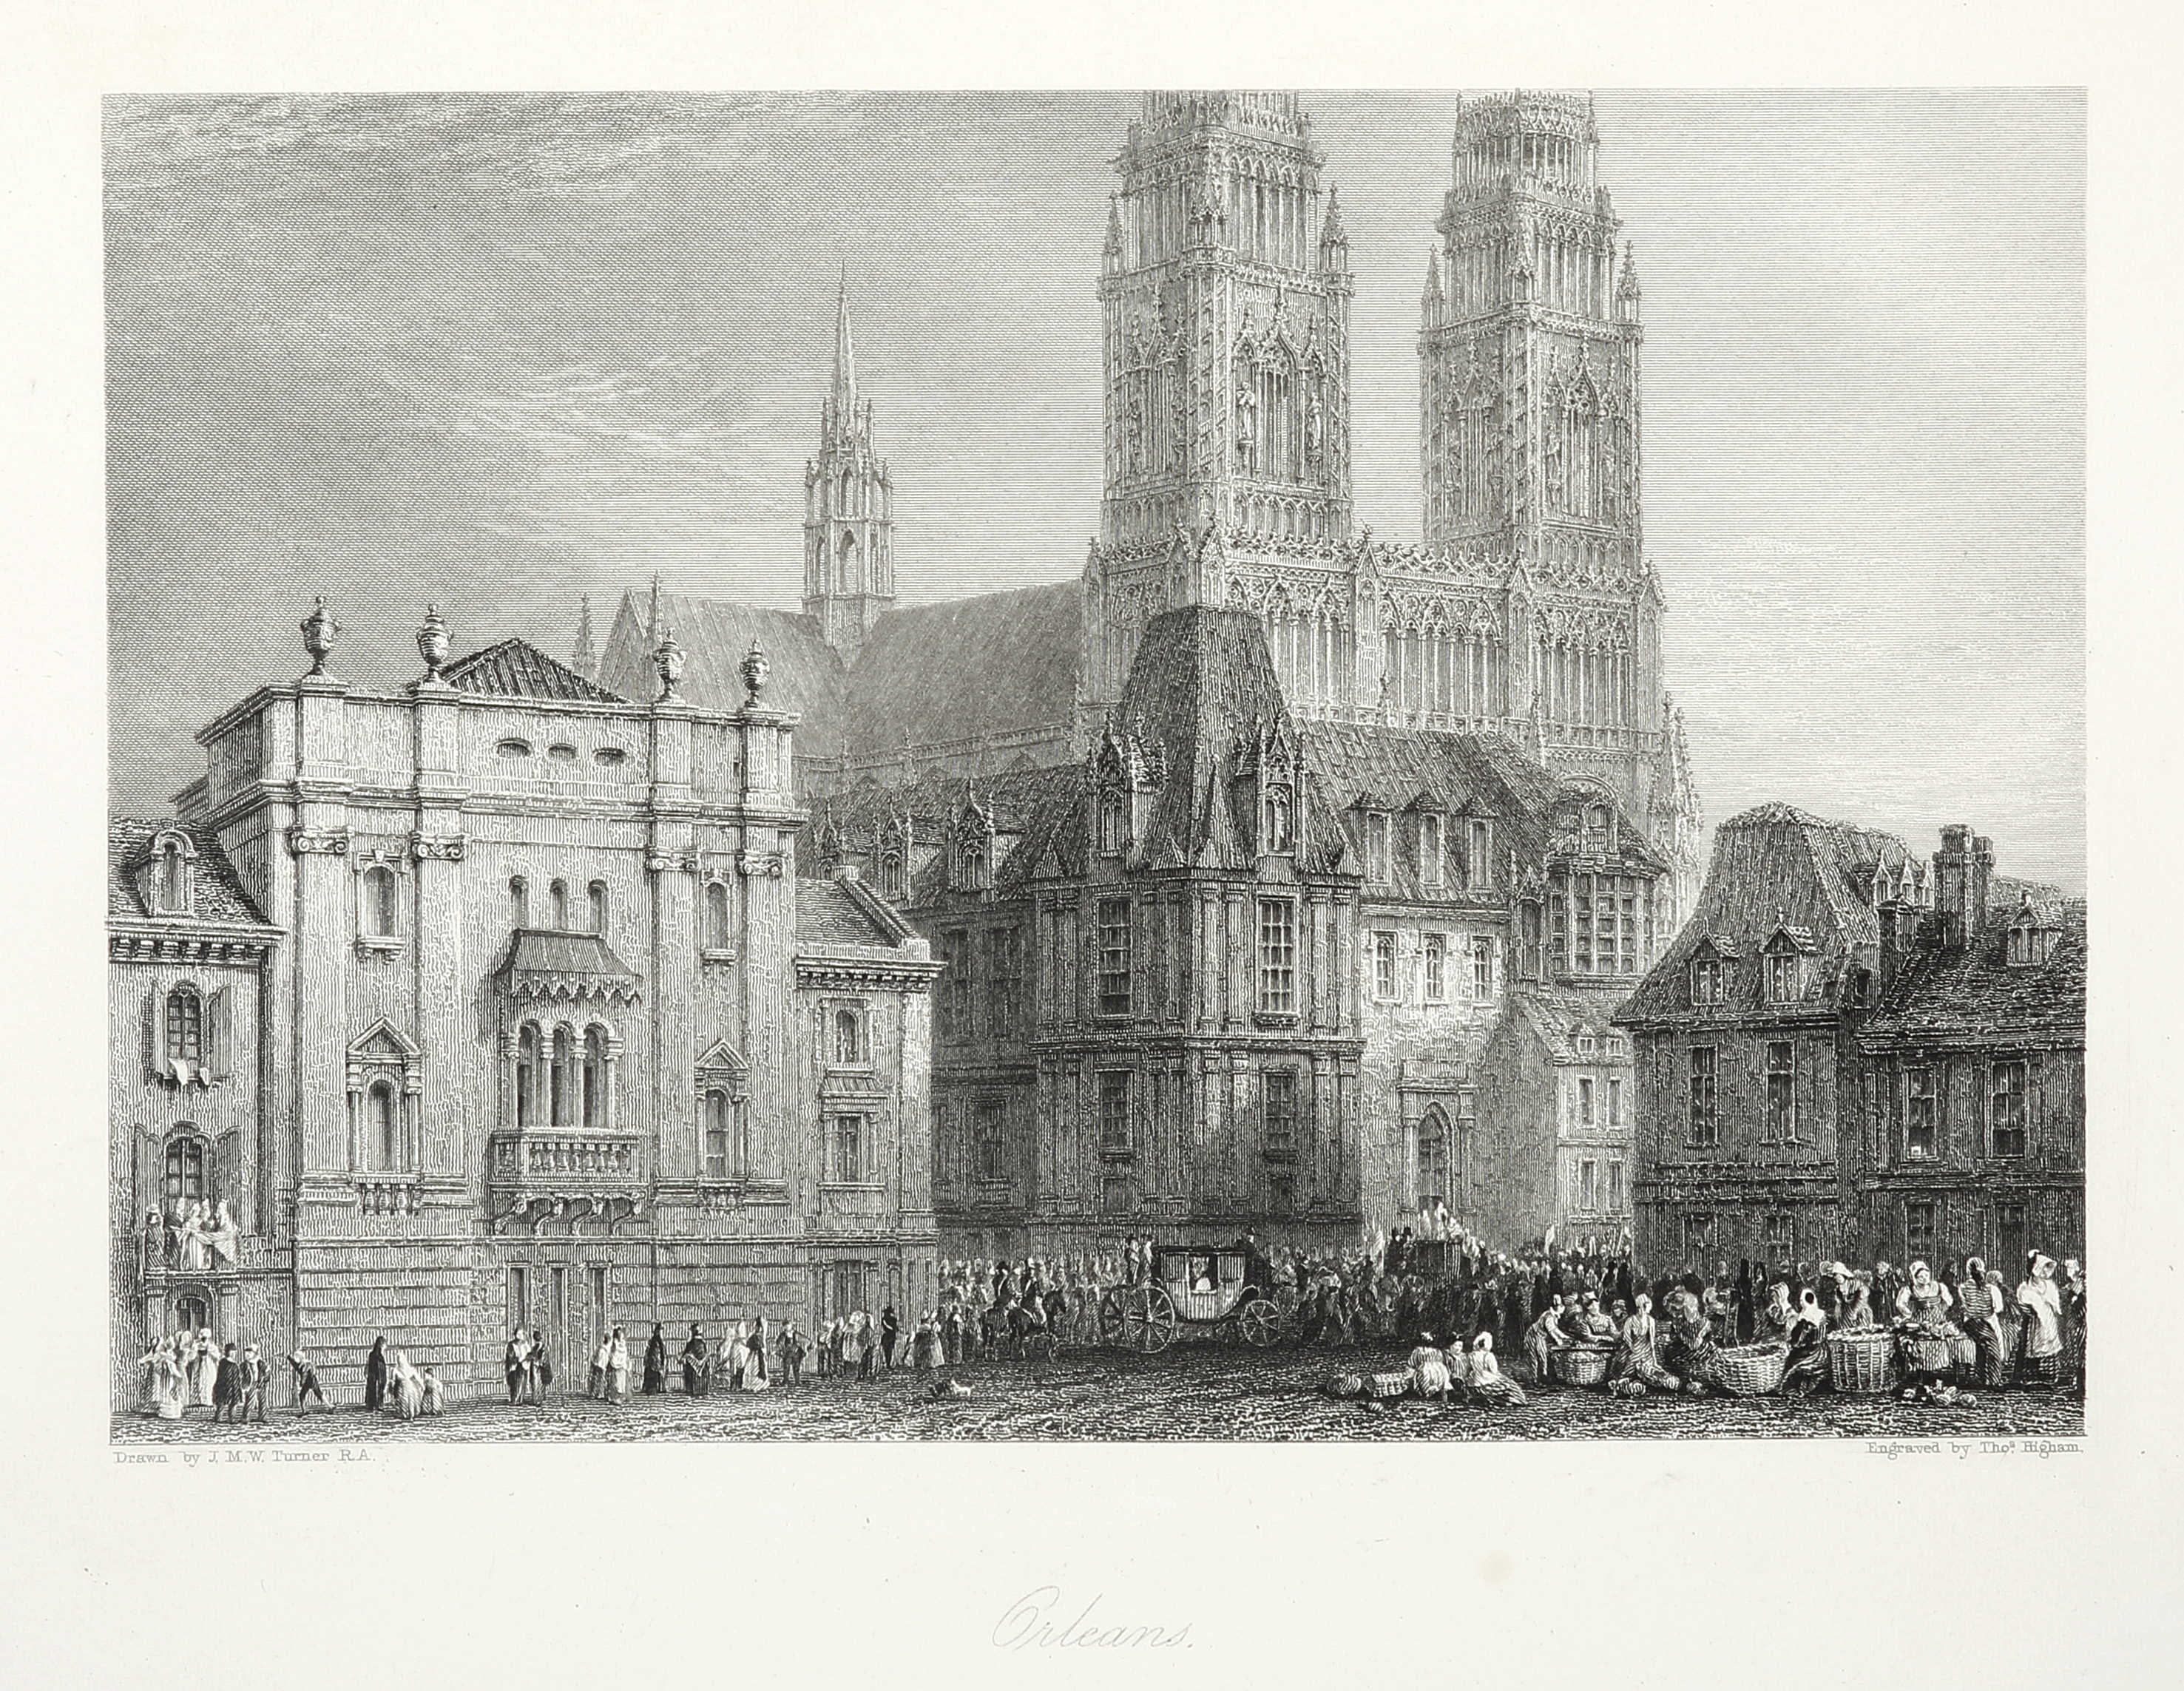 Orleans - Antique Print from 1834